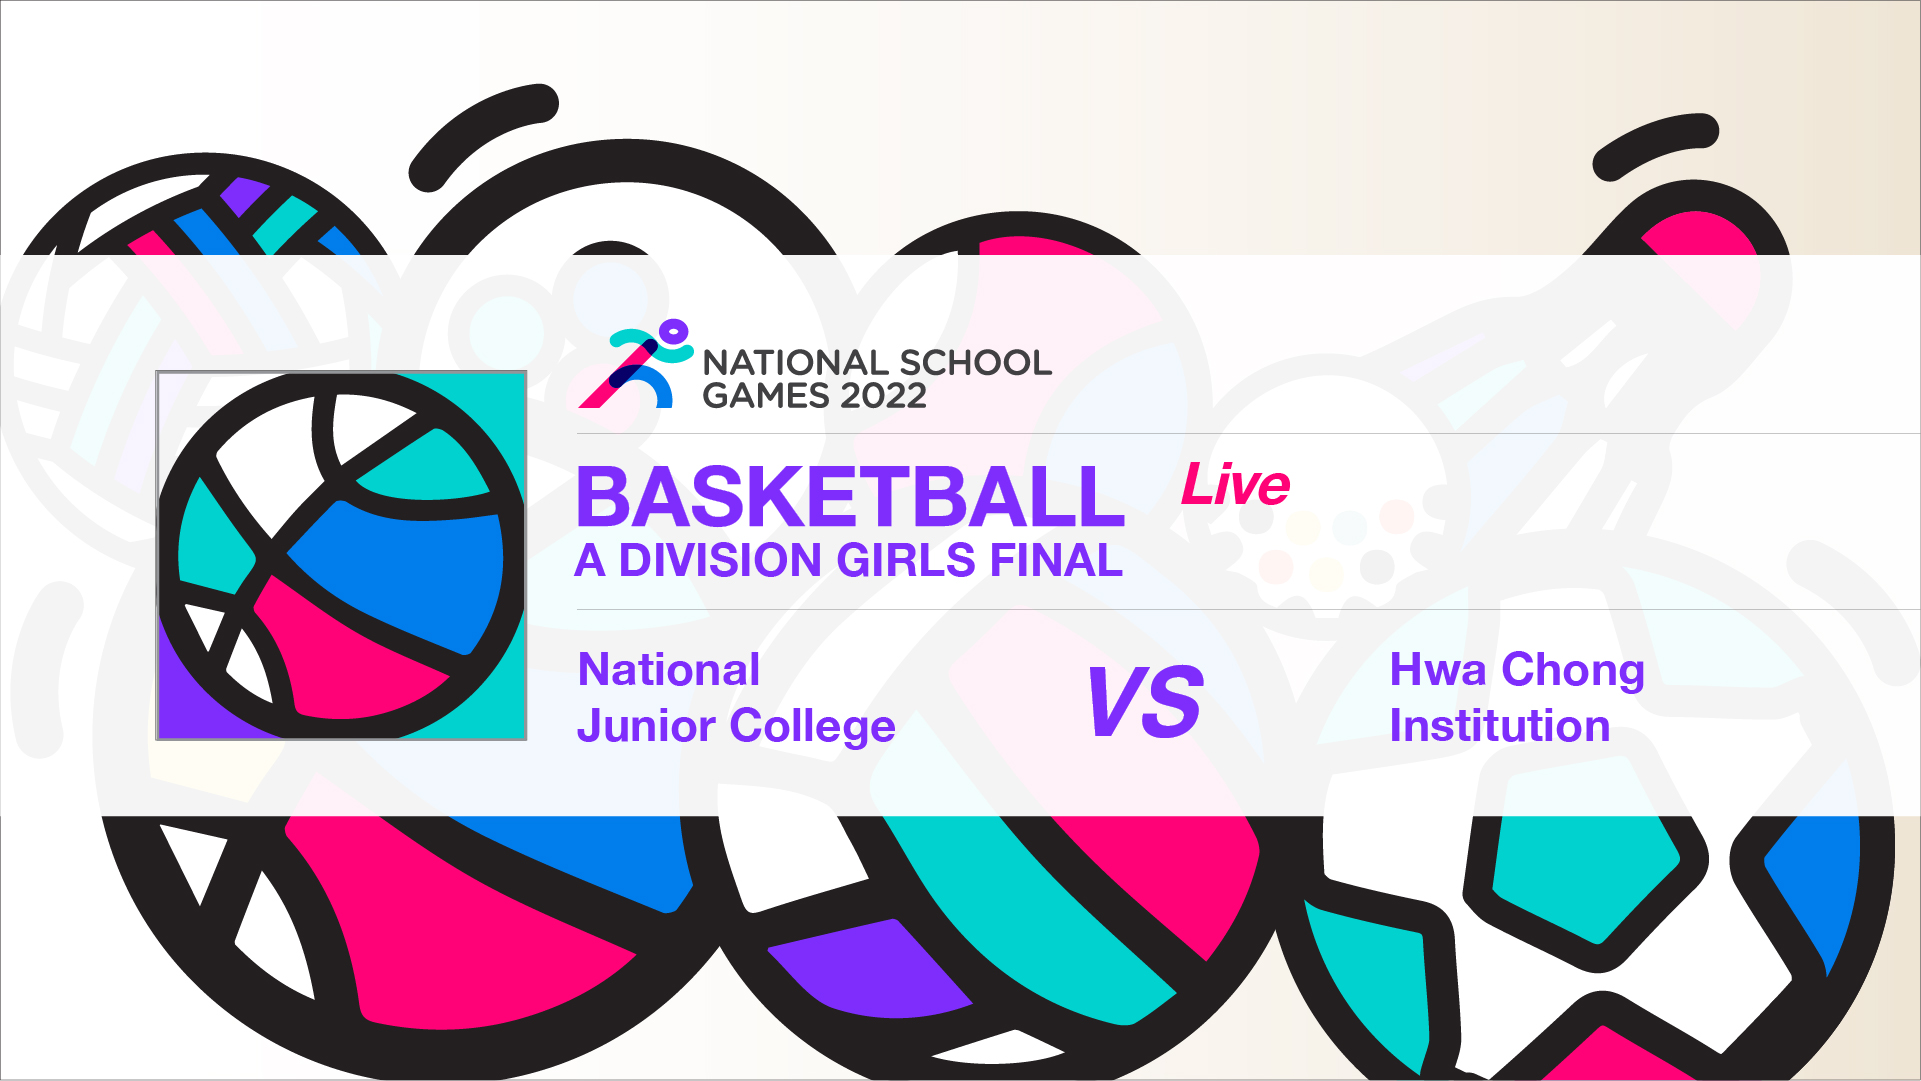 SSSC Basketball A Division Girls Final | National Junior College vs Hwa Chong Instituition